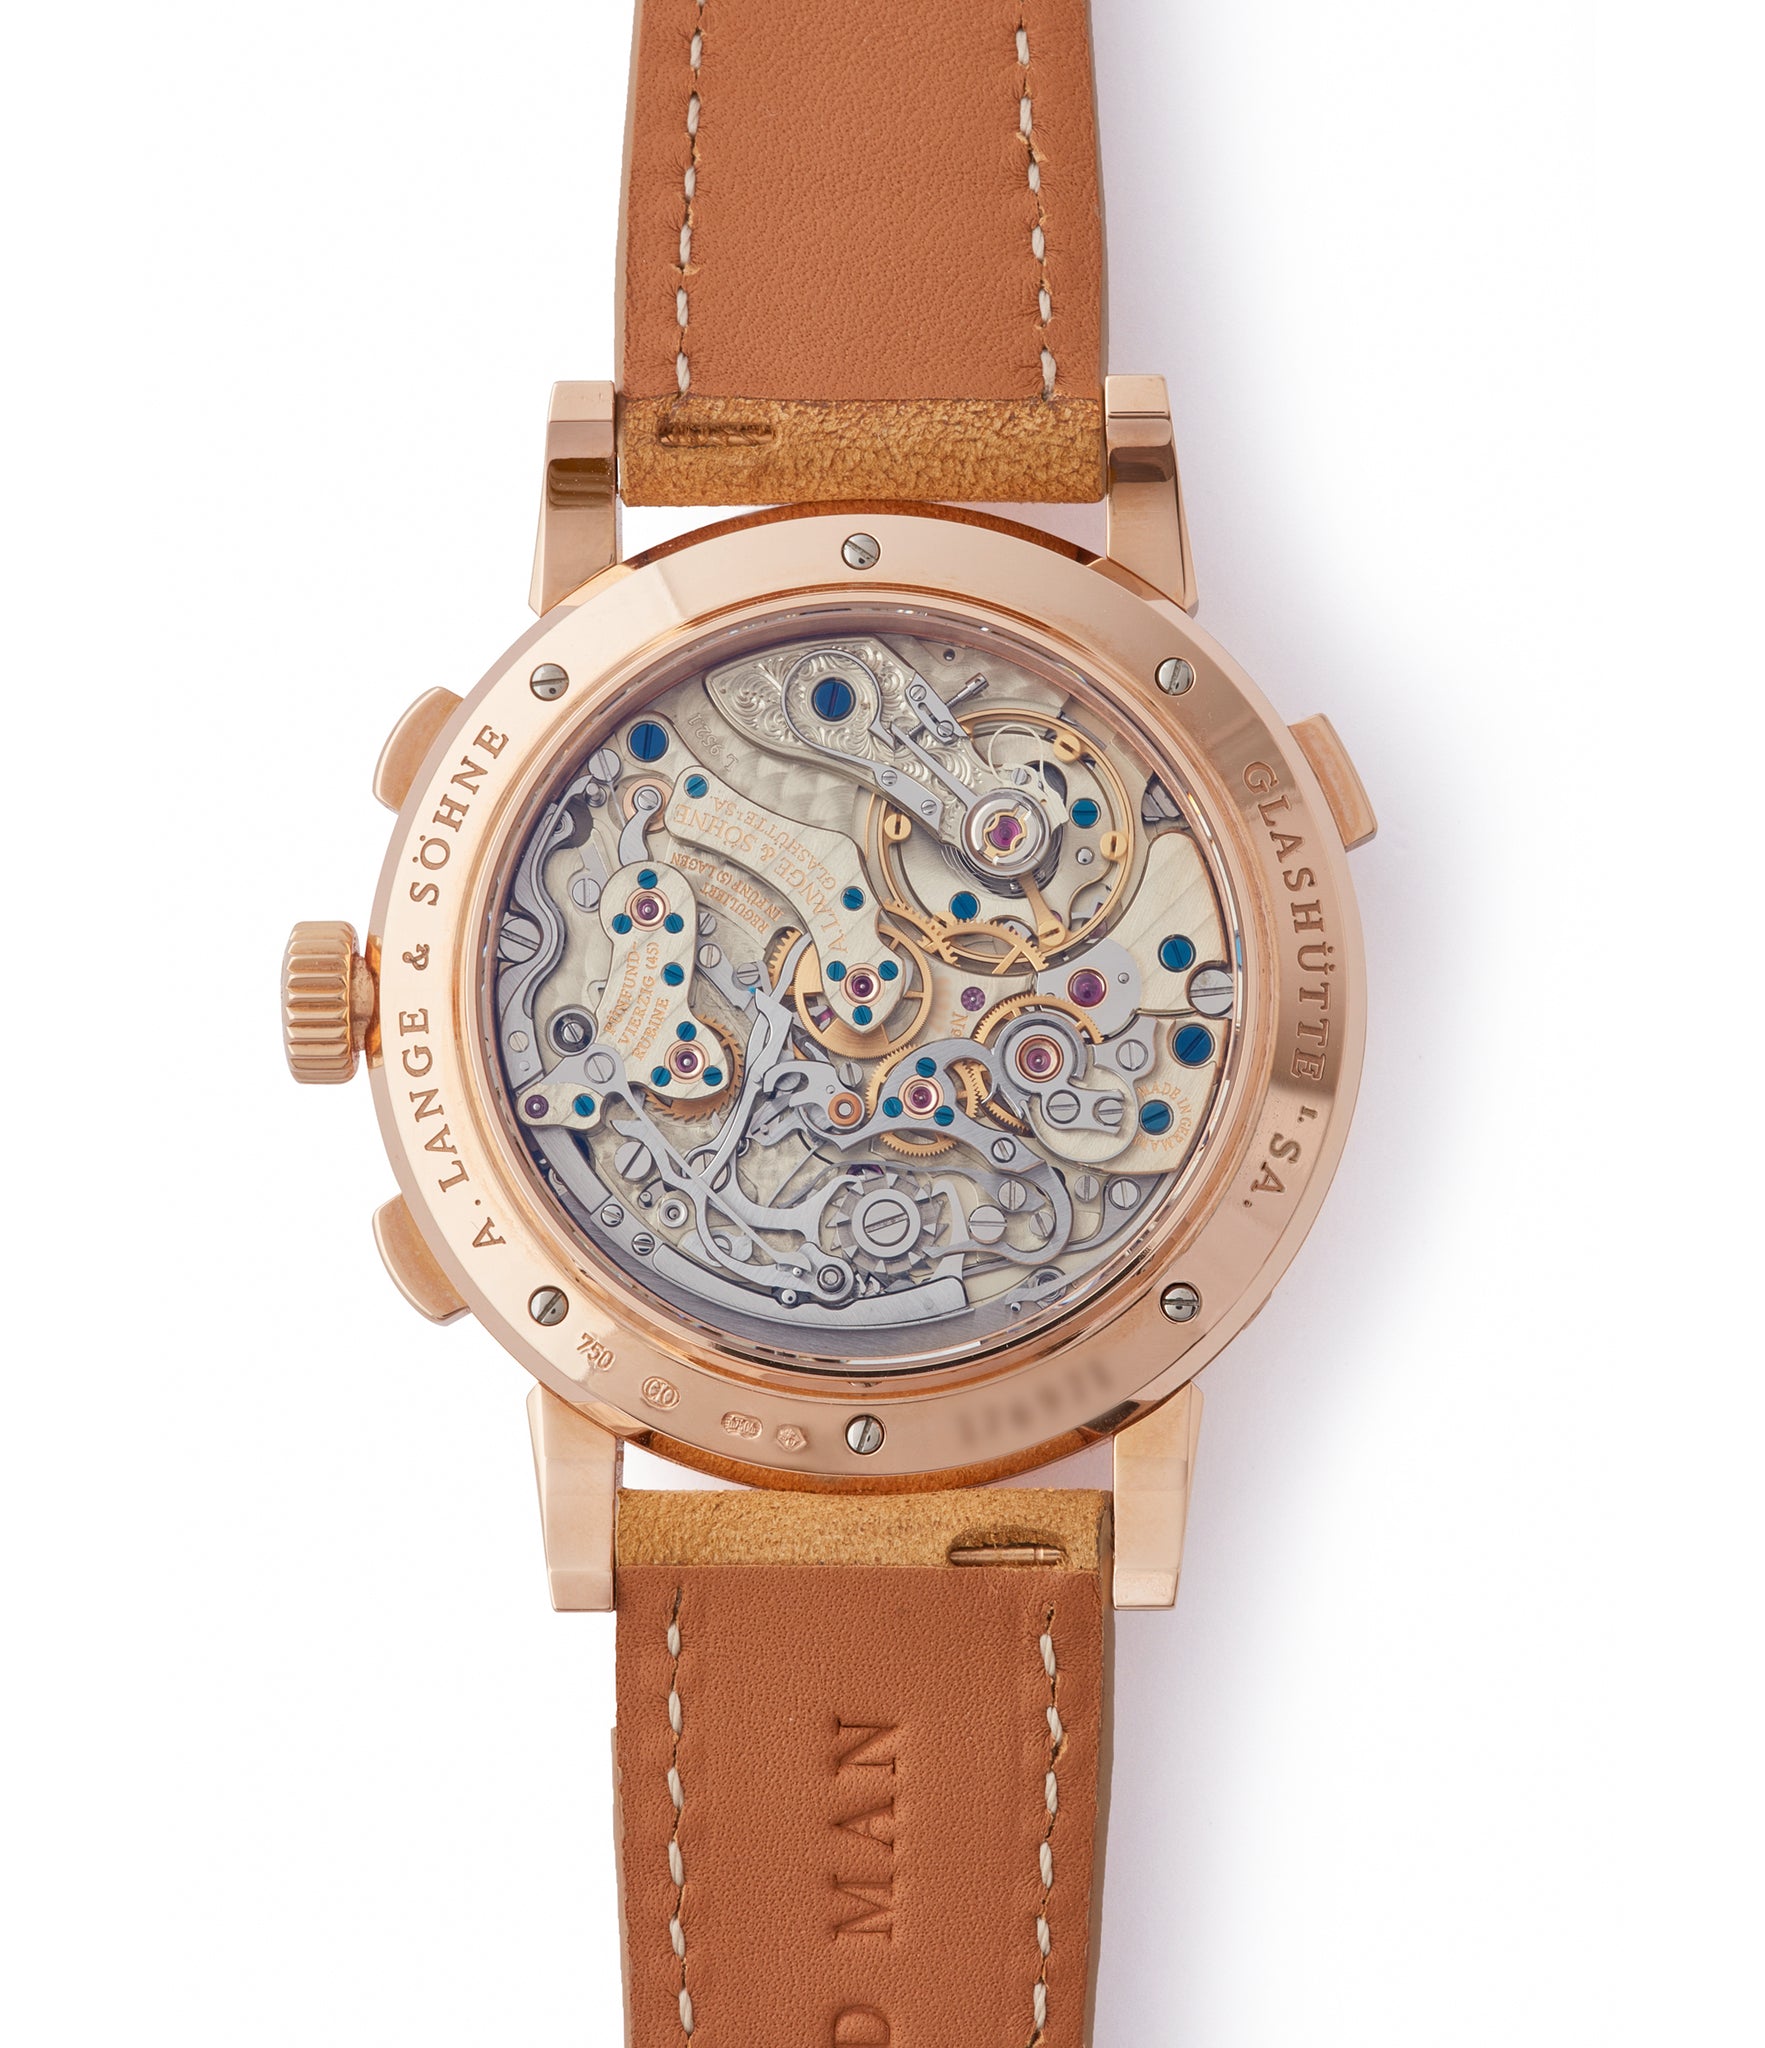 manual-winding German-made A. Lange & Sohne Datograph  Perpetual Calendar 410.032 pink gold pre-owned dress watch for sale online at A Collected Man London seller rare watches